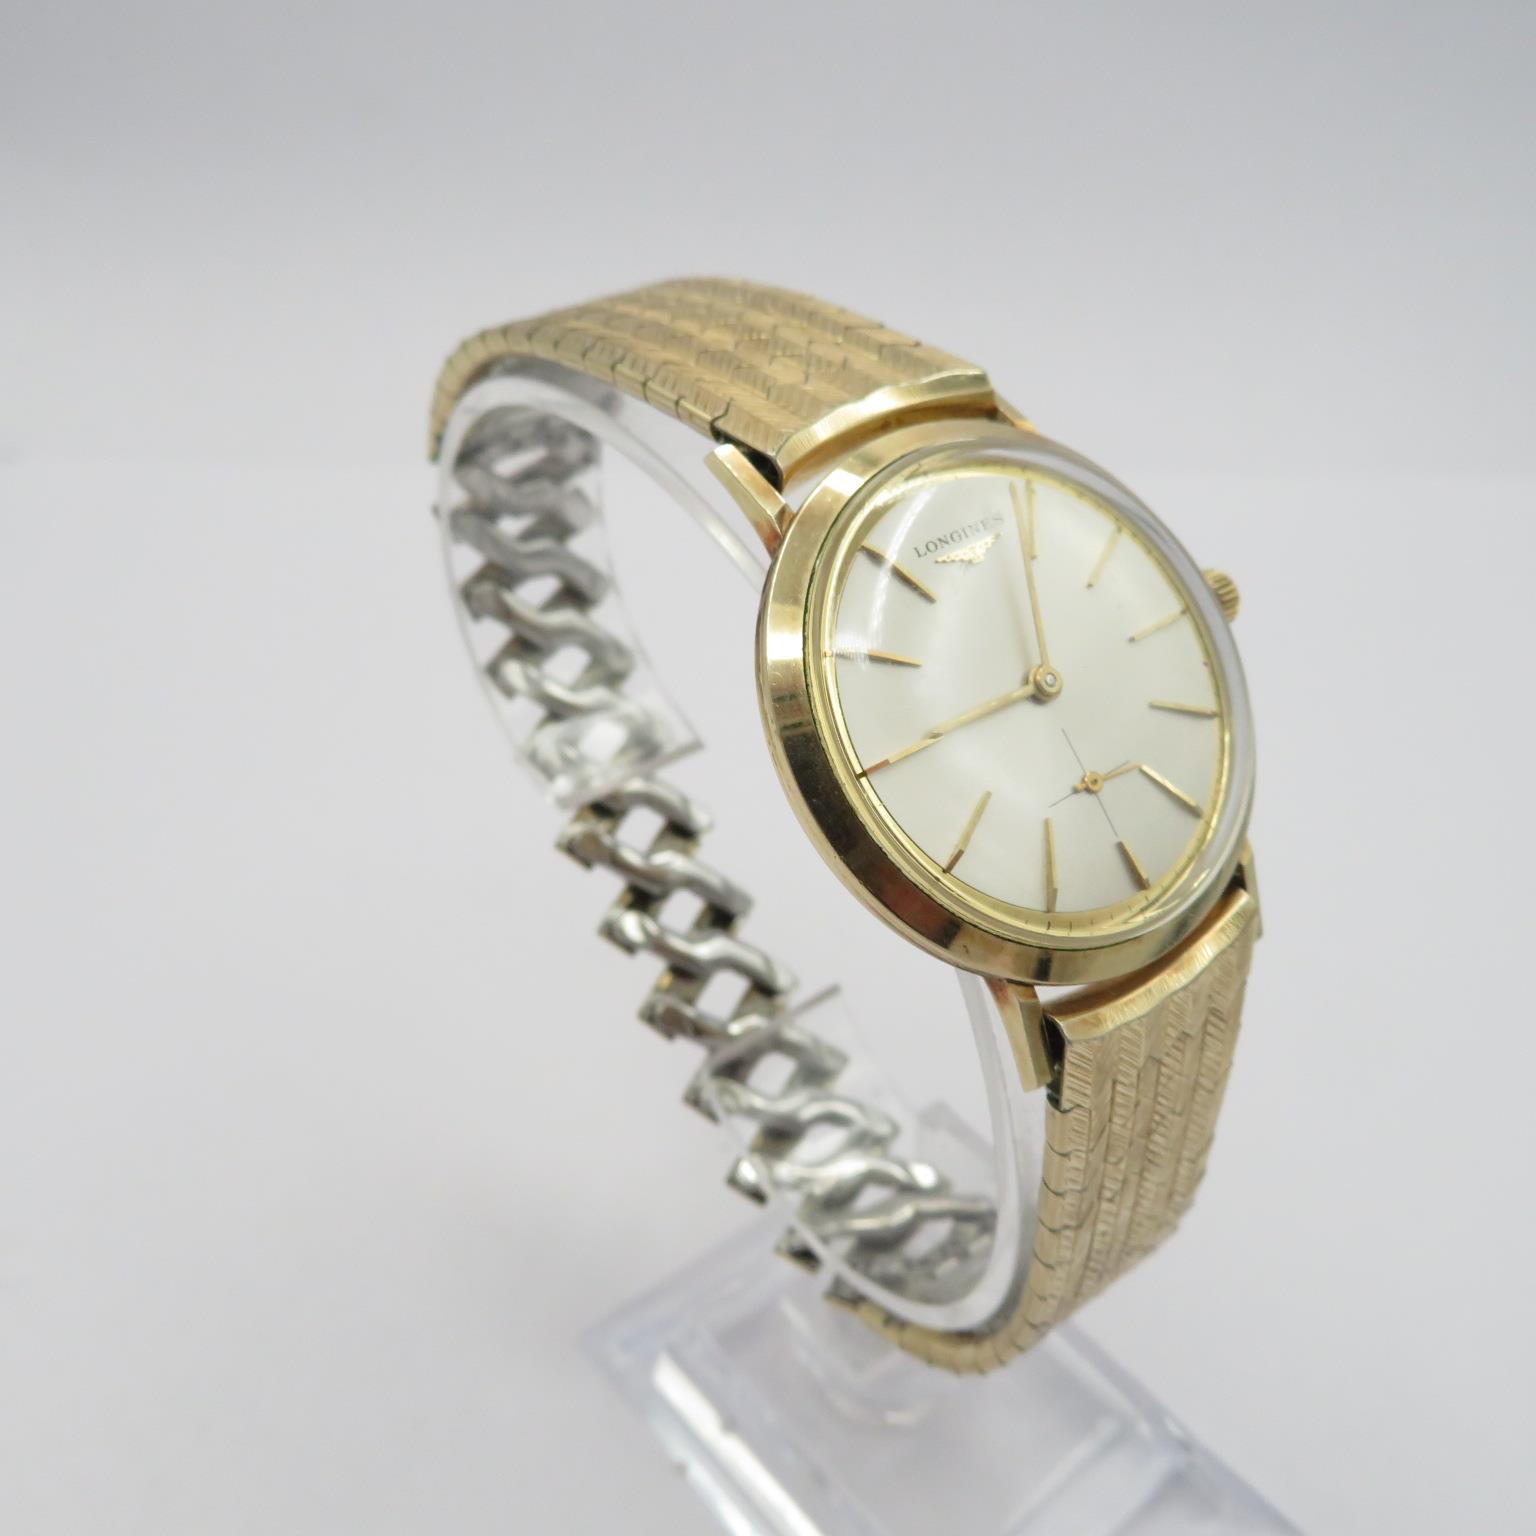 Longines 10 ct gold filled ref 1200 gents vintage gold filled wristwatch handwind working flying - Image 4 of 8